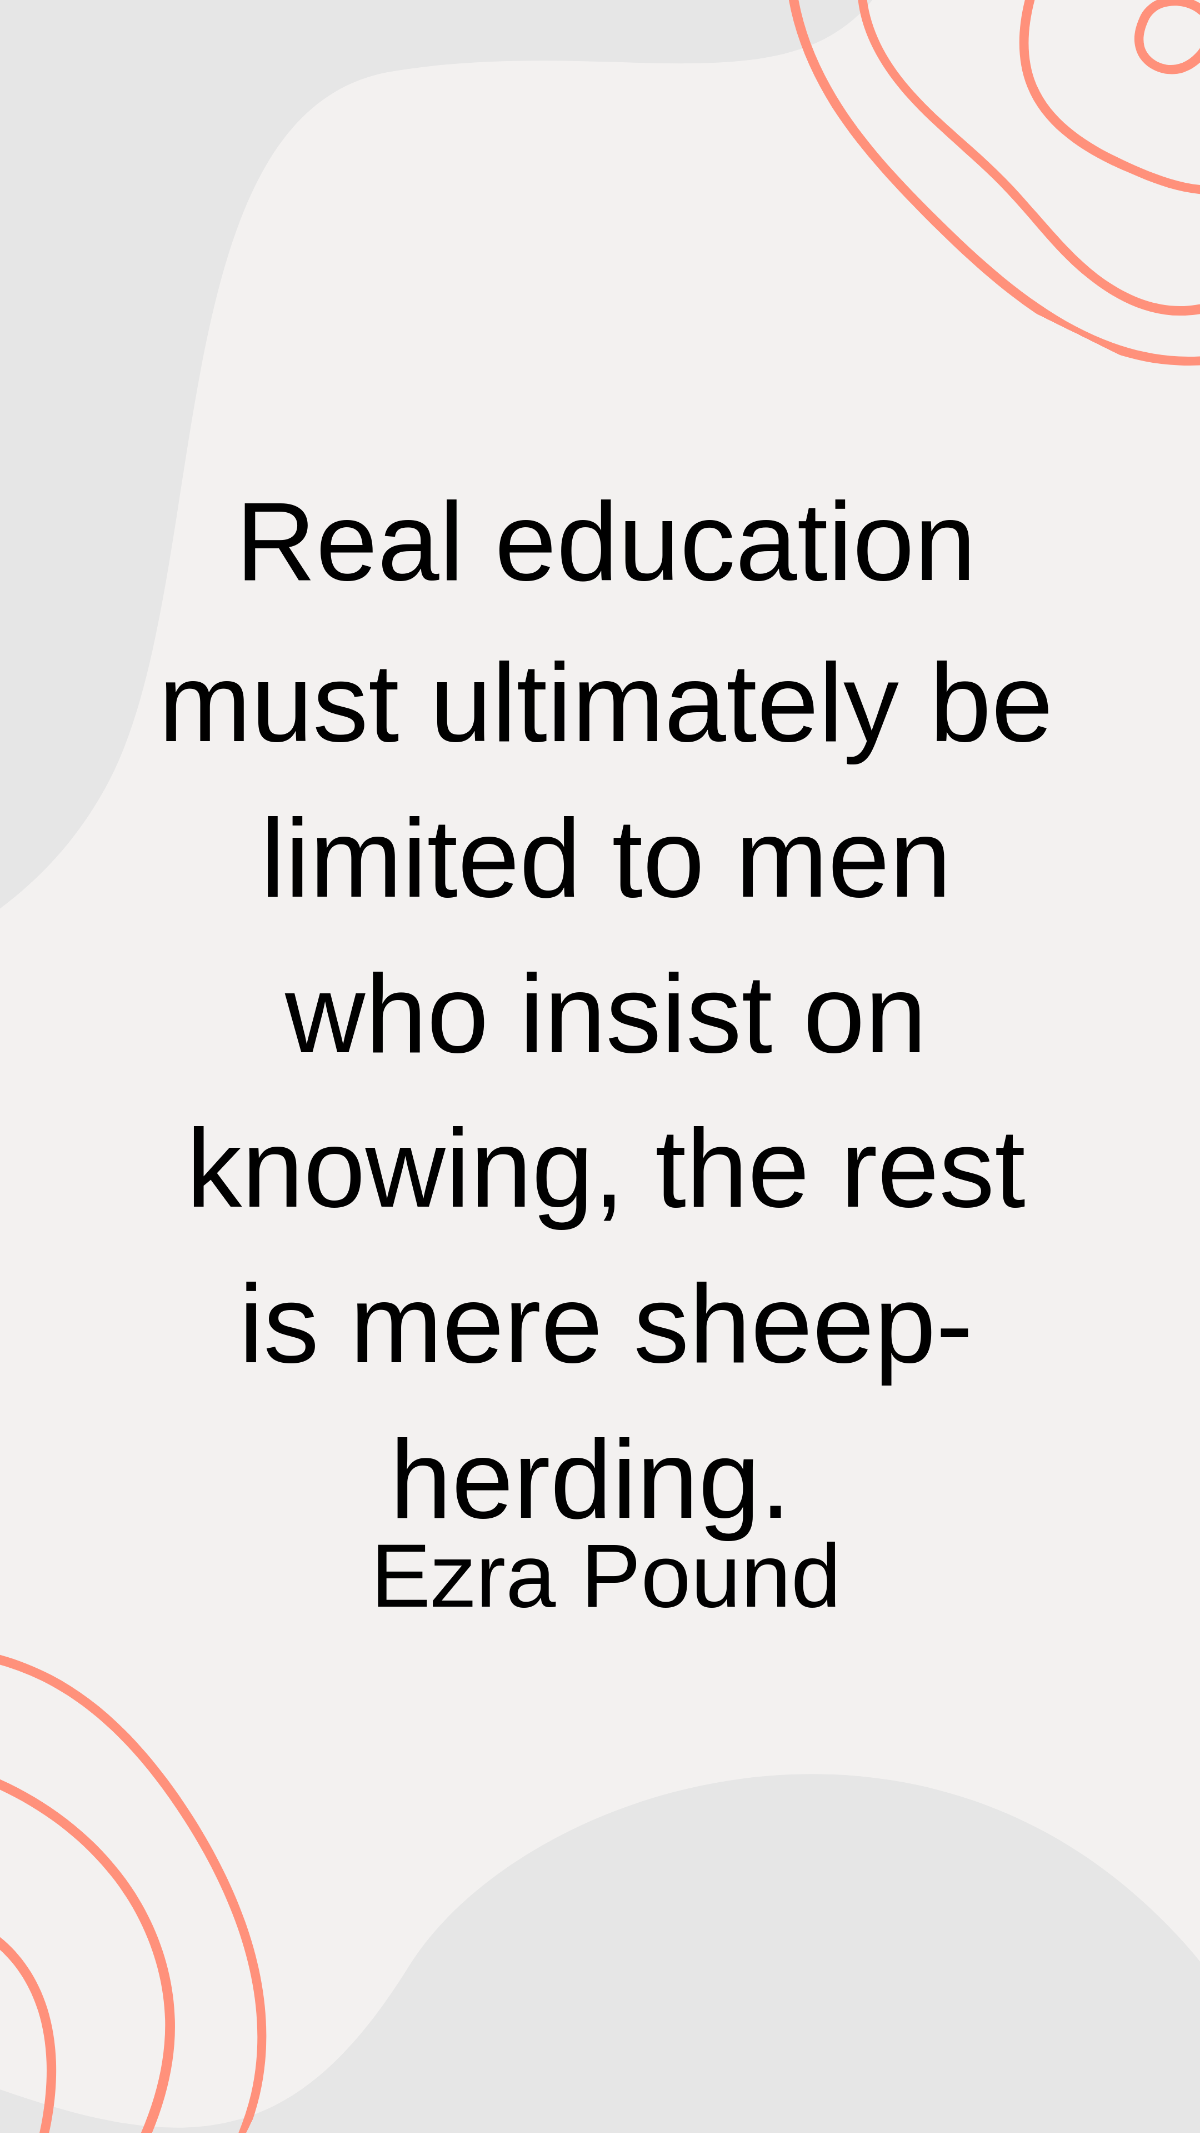 Ezra Pound - Real education must ultimately be limited to men who insist on knowing, the rest is mere sheep-herding.